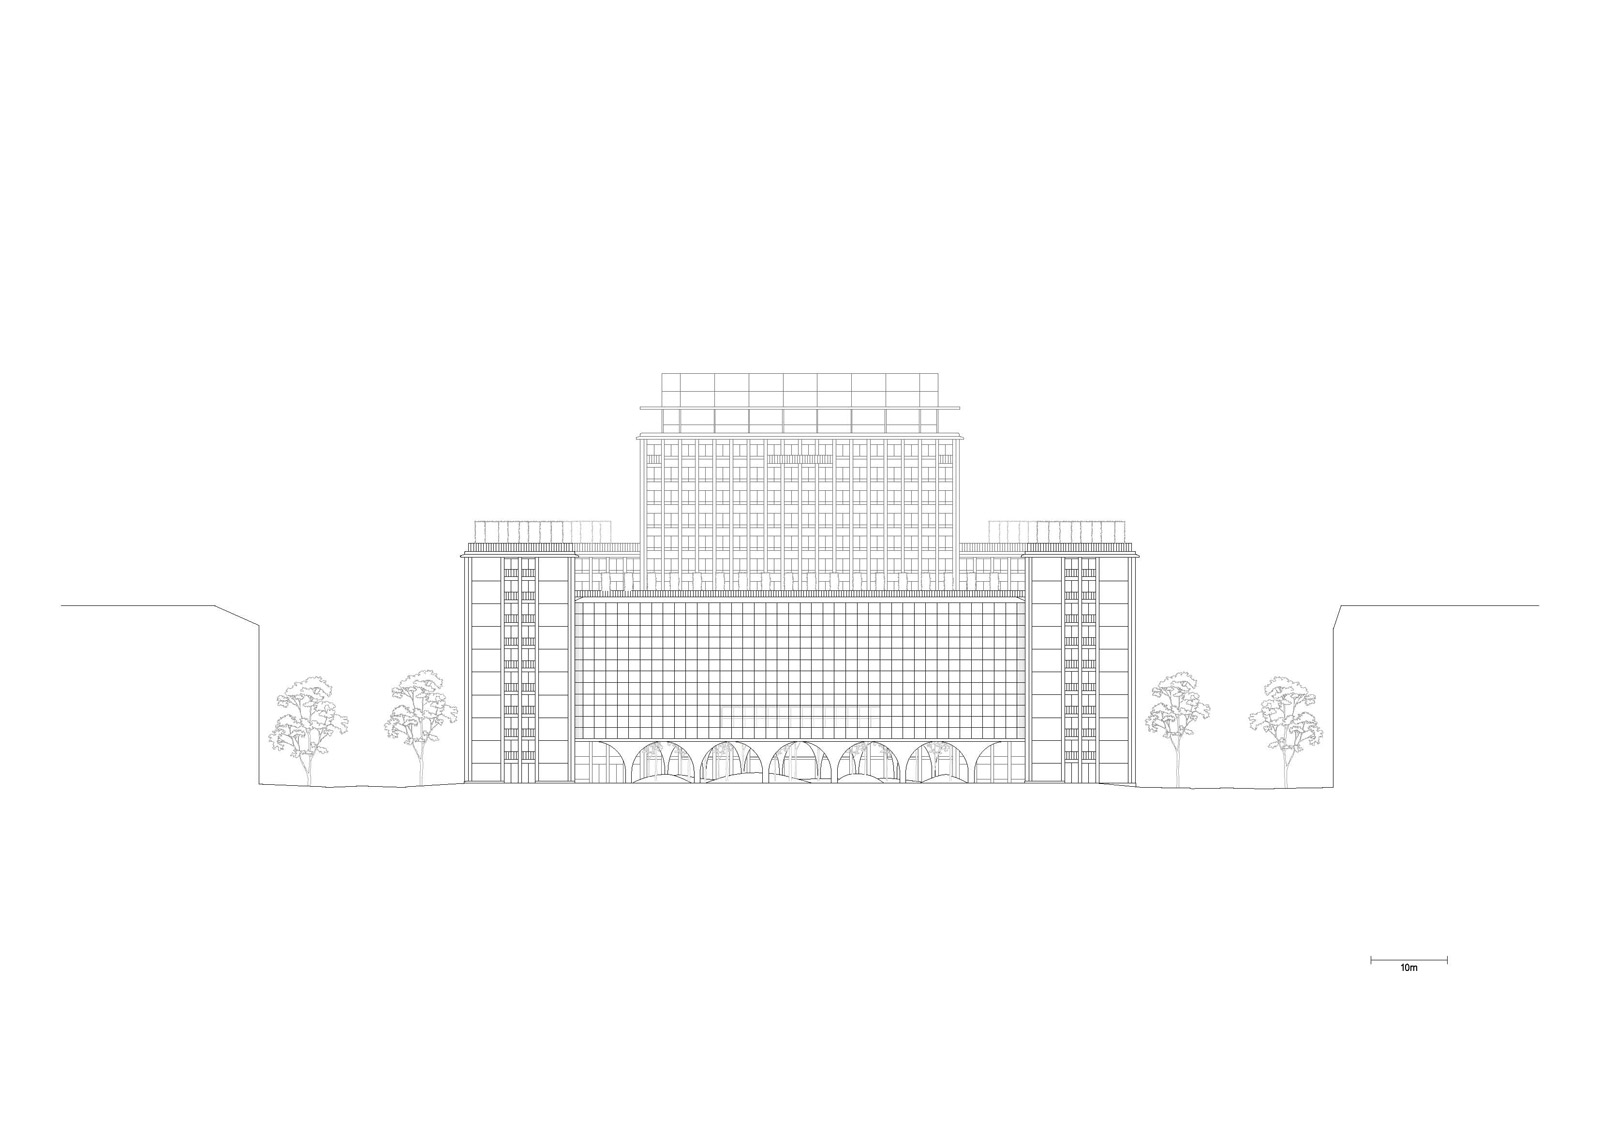 Image of 20220913 Chipperfield MorlandMixiteCapitale 19 in Morland Mixité Capitale - Cosentino